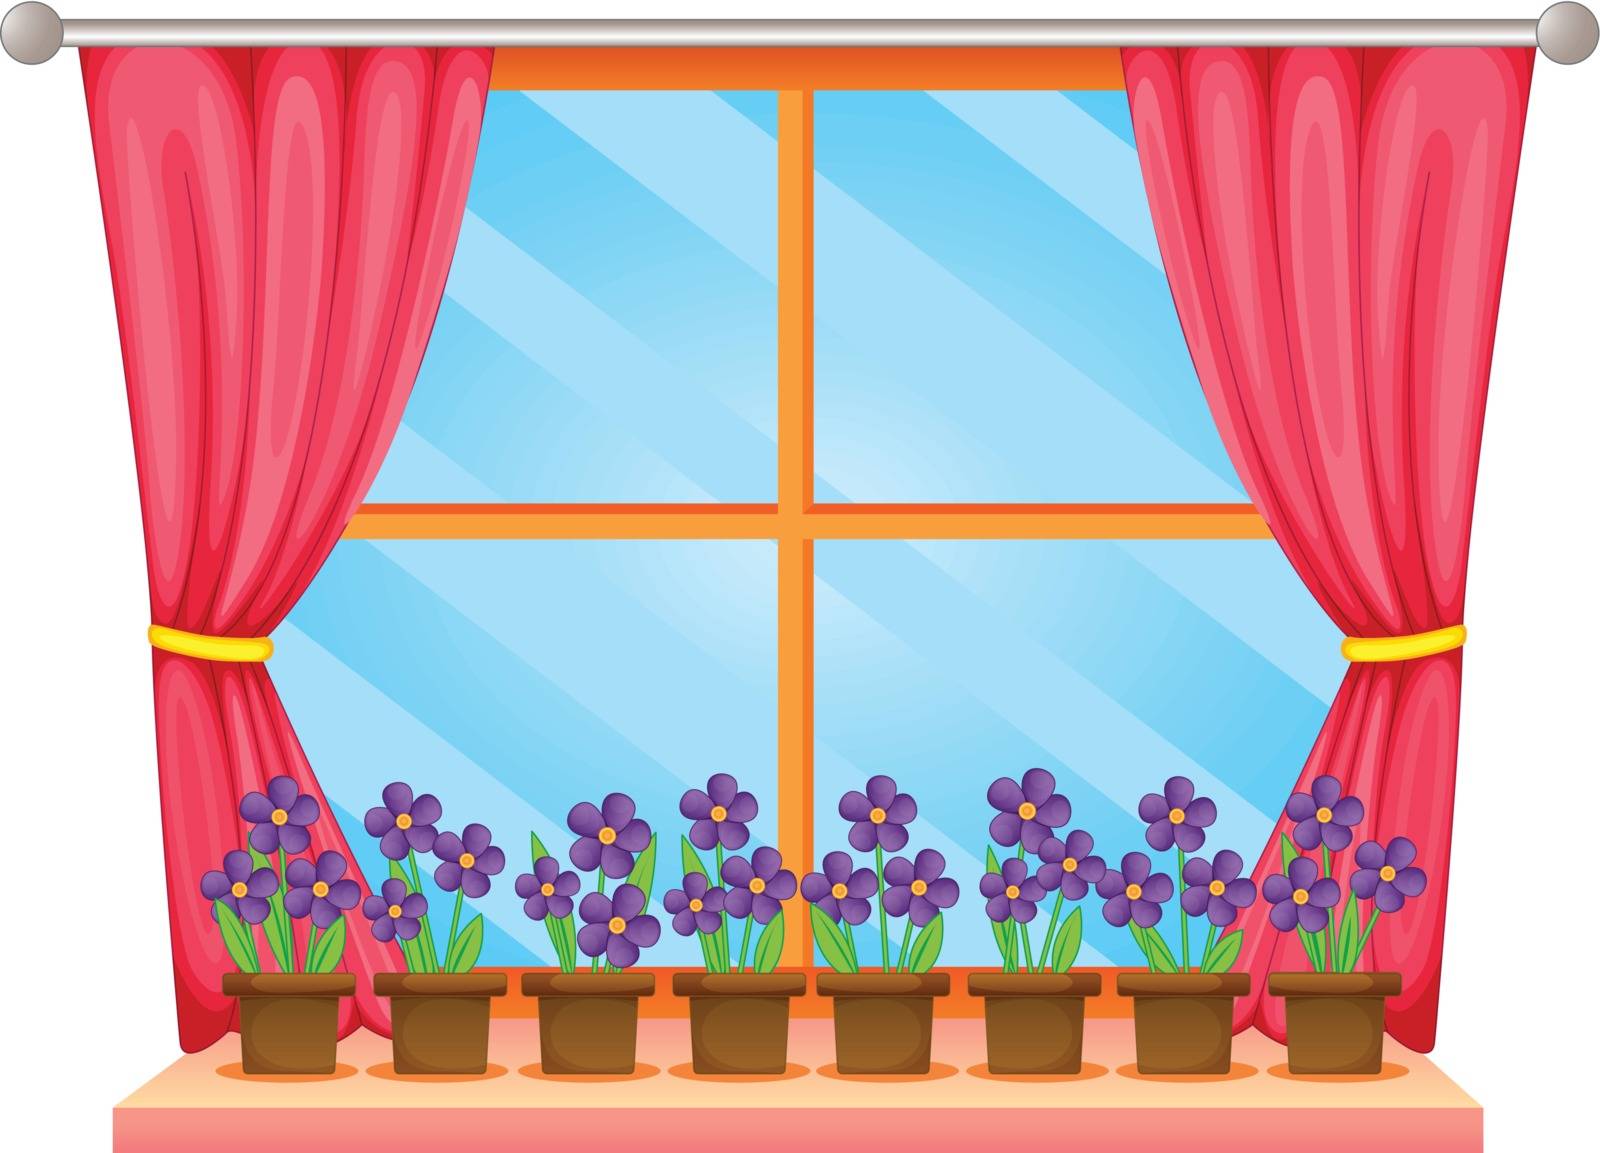 Illustration of a window sill with flowers